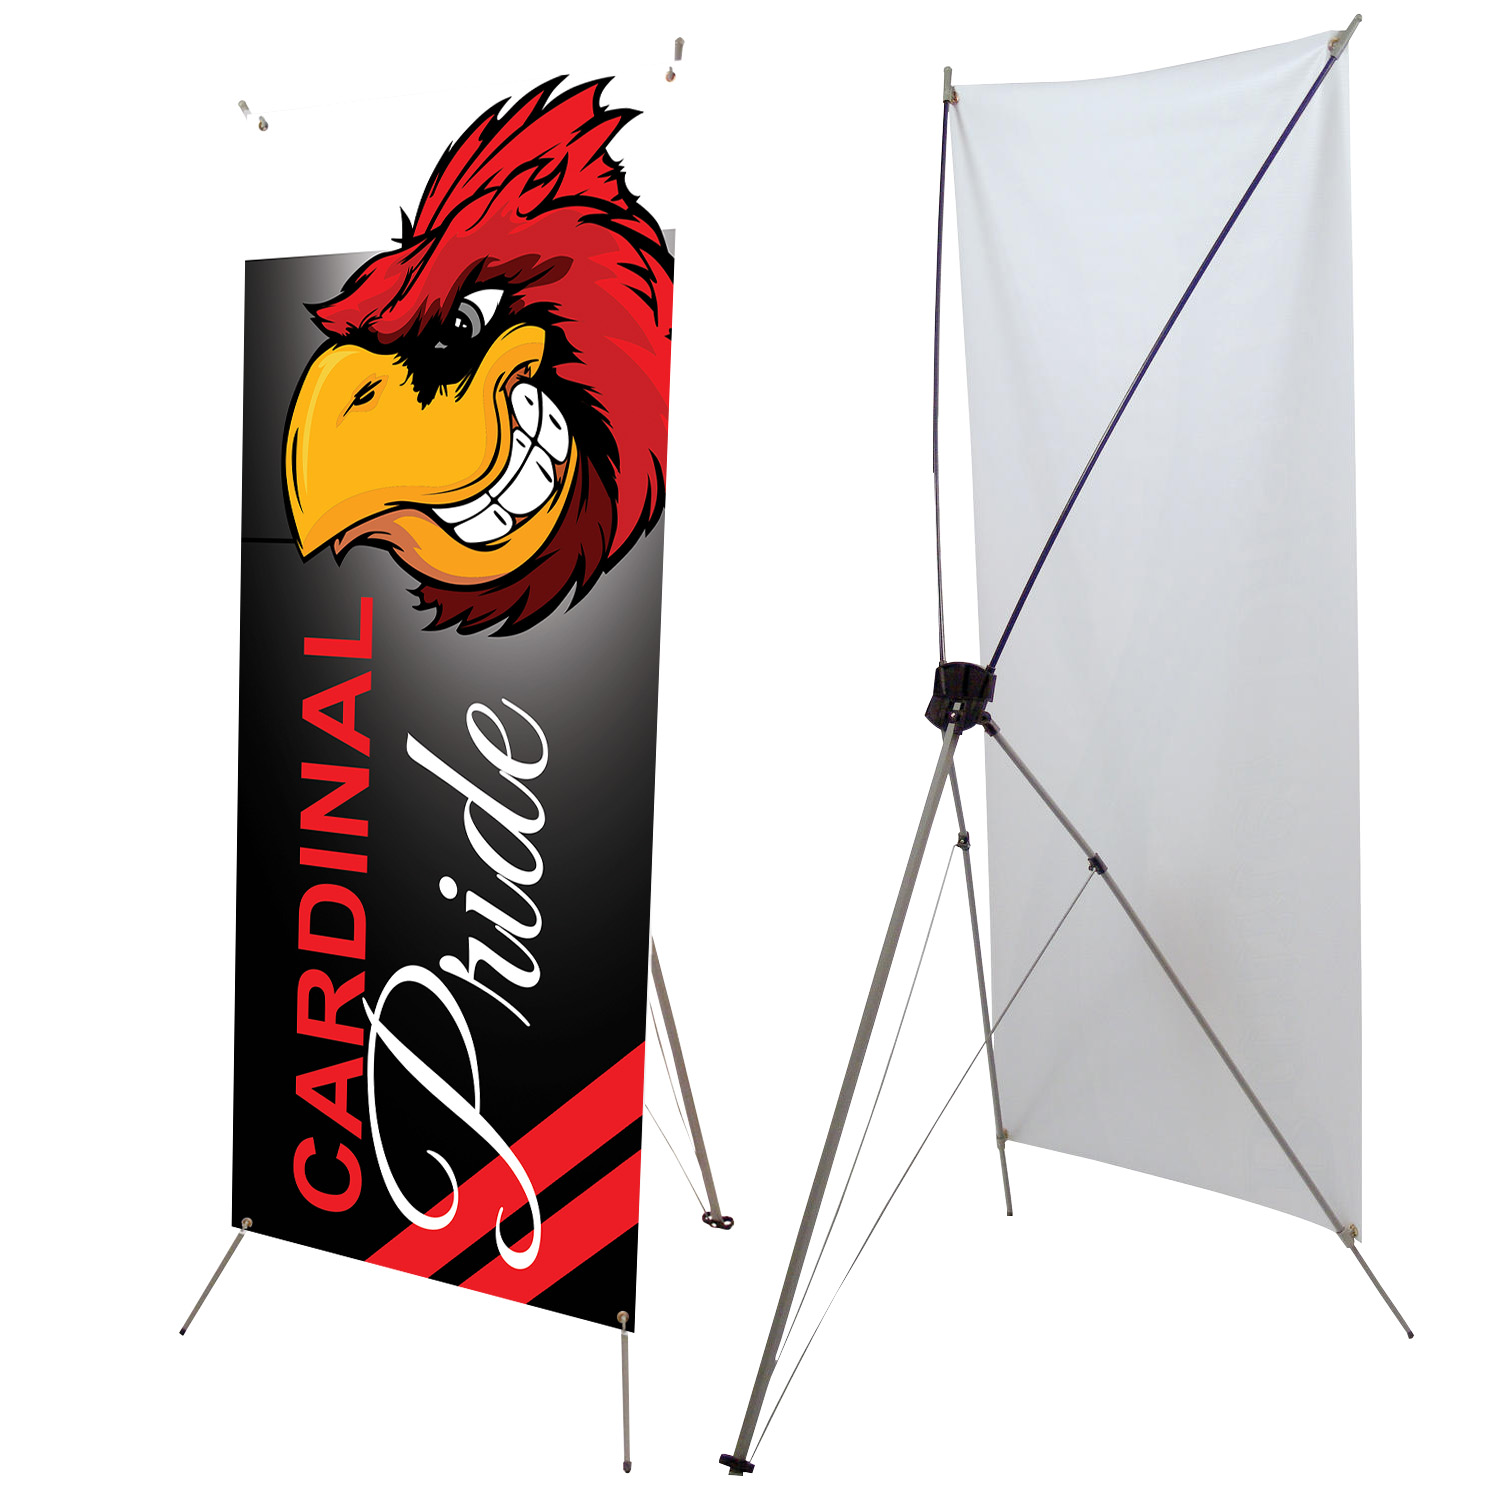 Tripod X with 70" x 24" Banner